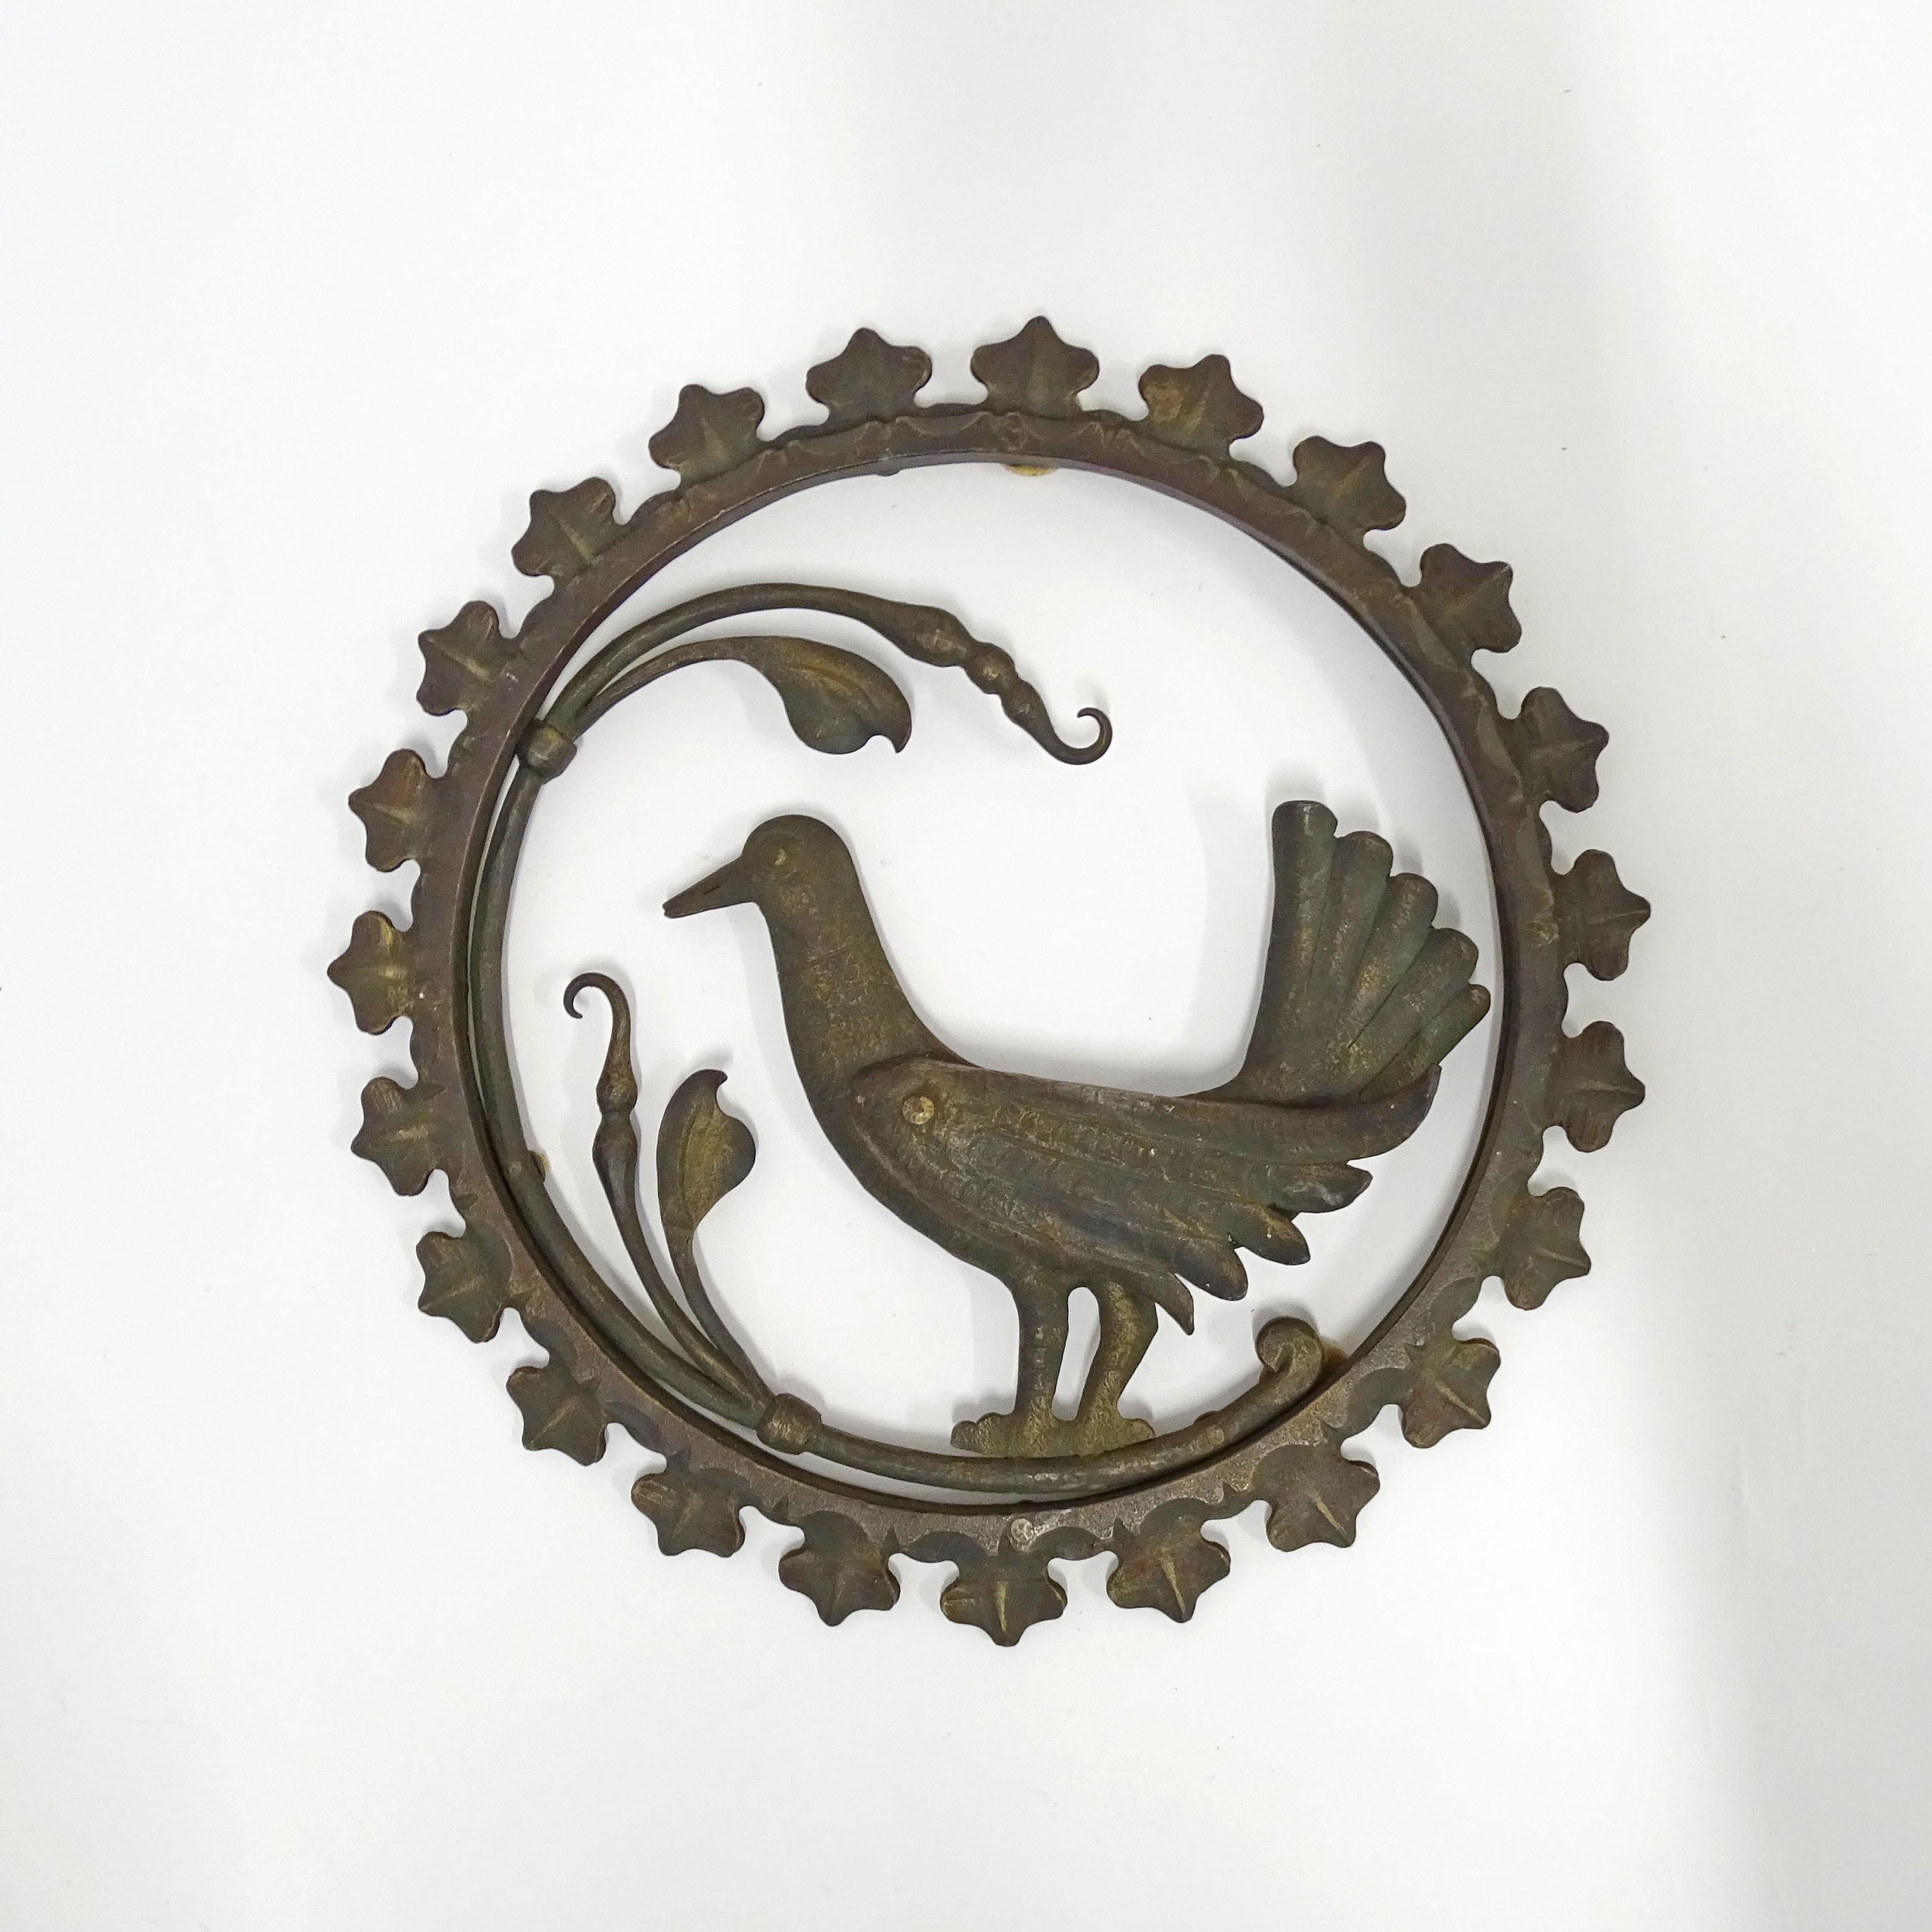 Art Deco Italian 1930s Wrought Iron Wall Decoration Depicting a Bird  For Sale